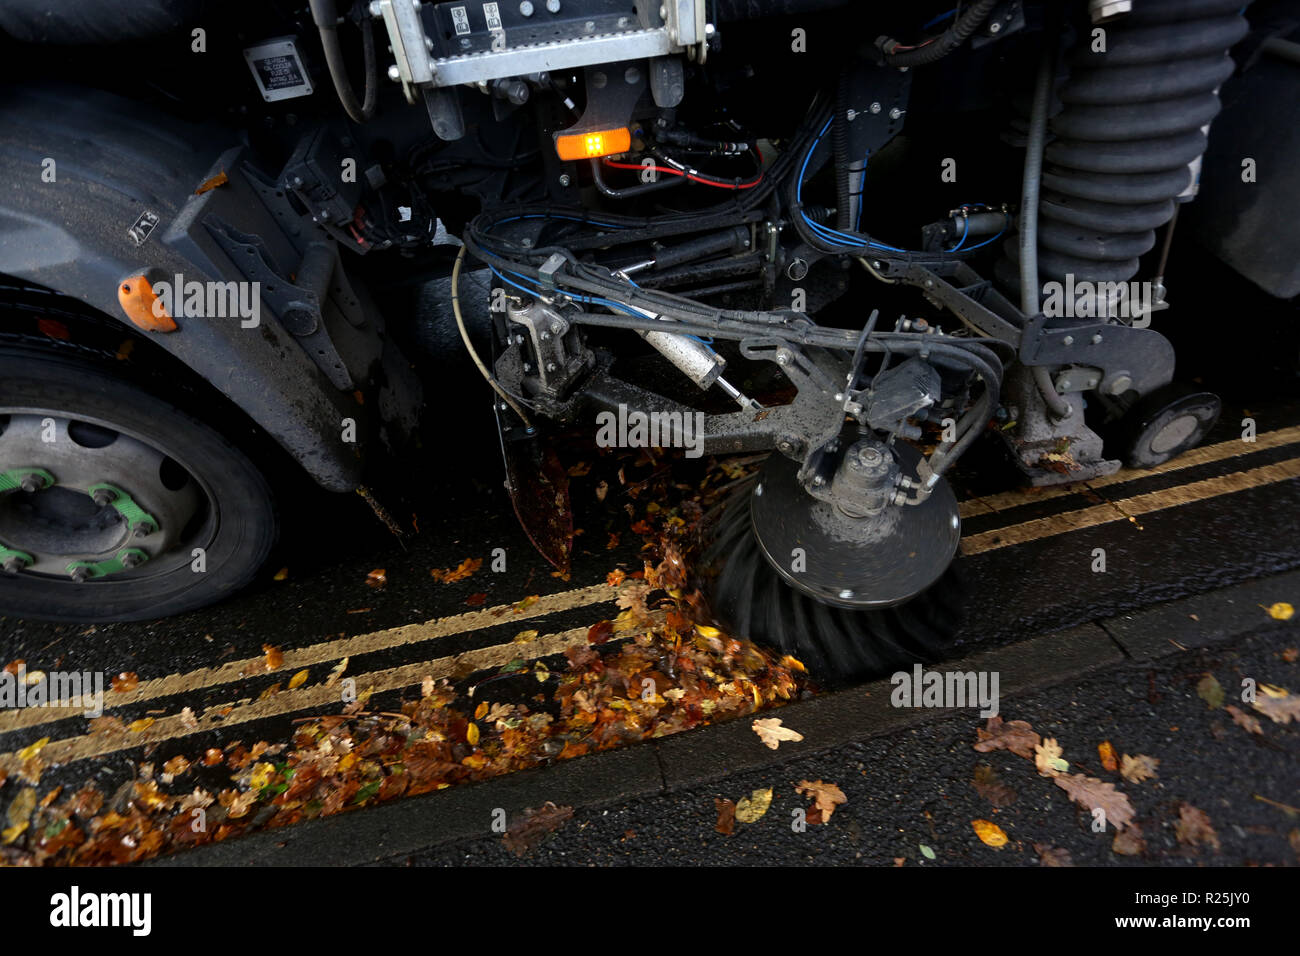 A council road sweeper pictured cleaning up leaves along the road in Chichester, West Sussex, UK. Stock Photo